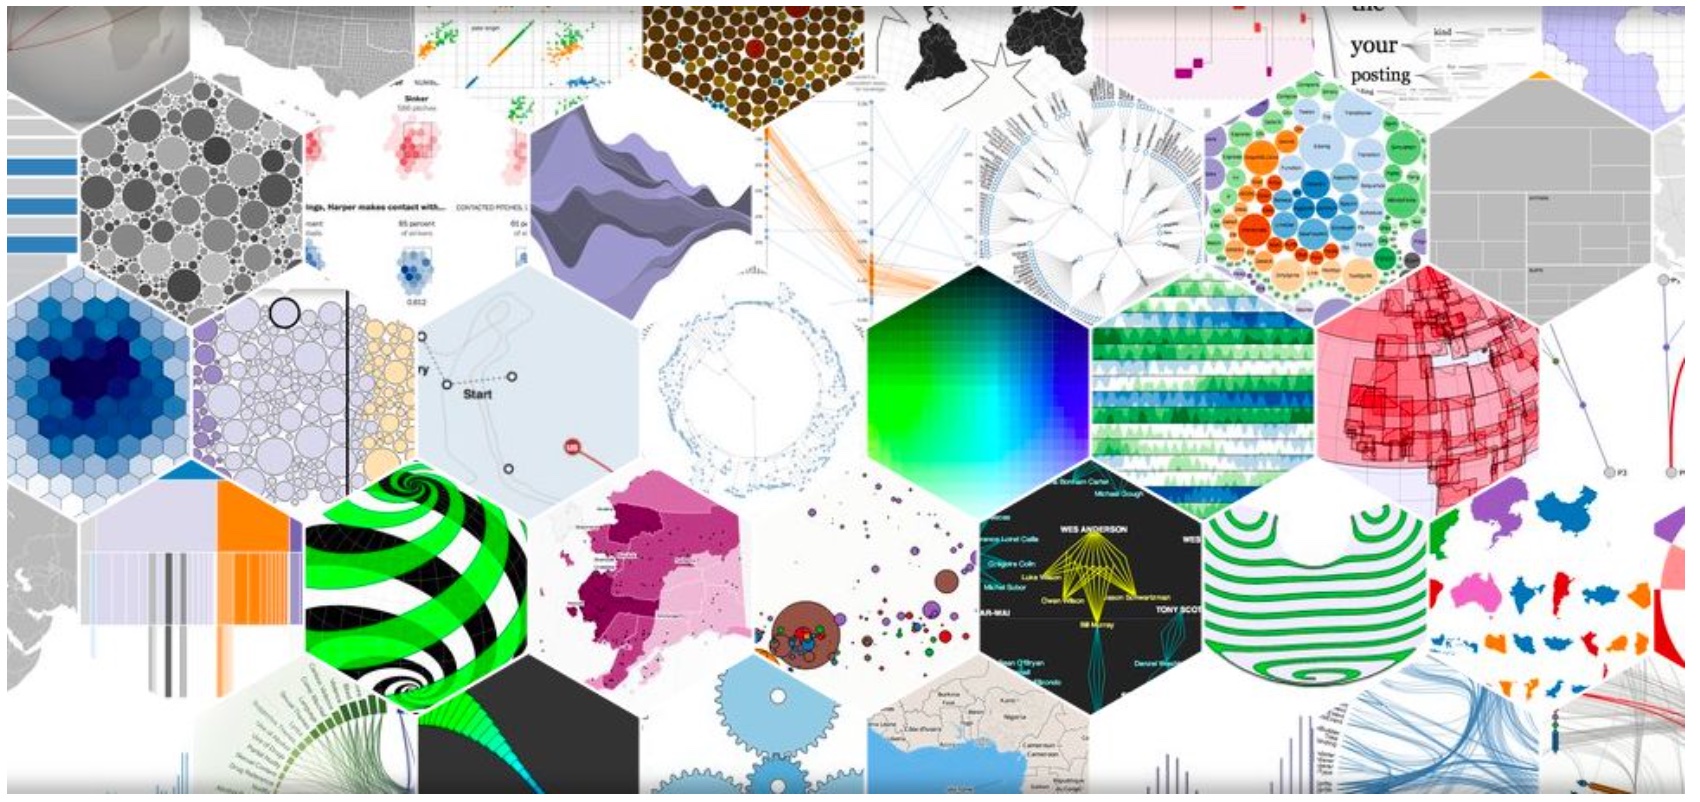 Examples of D3 visualisations from D3js.org